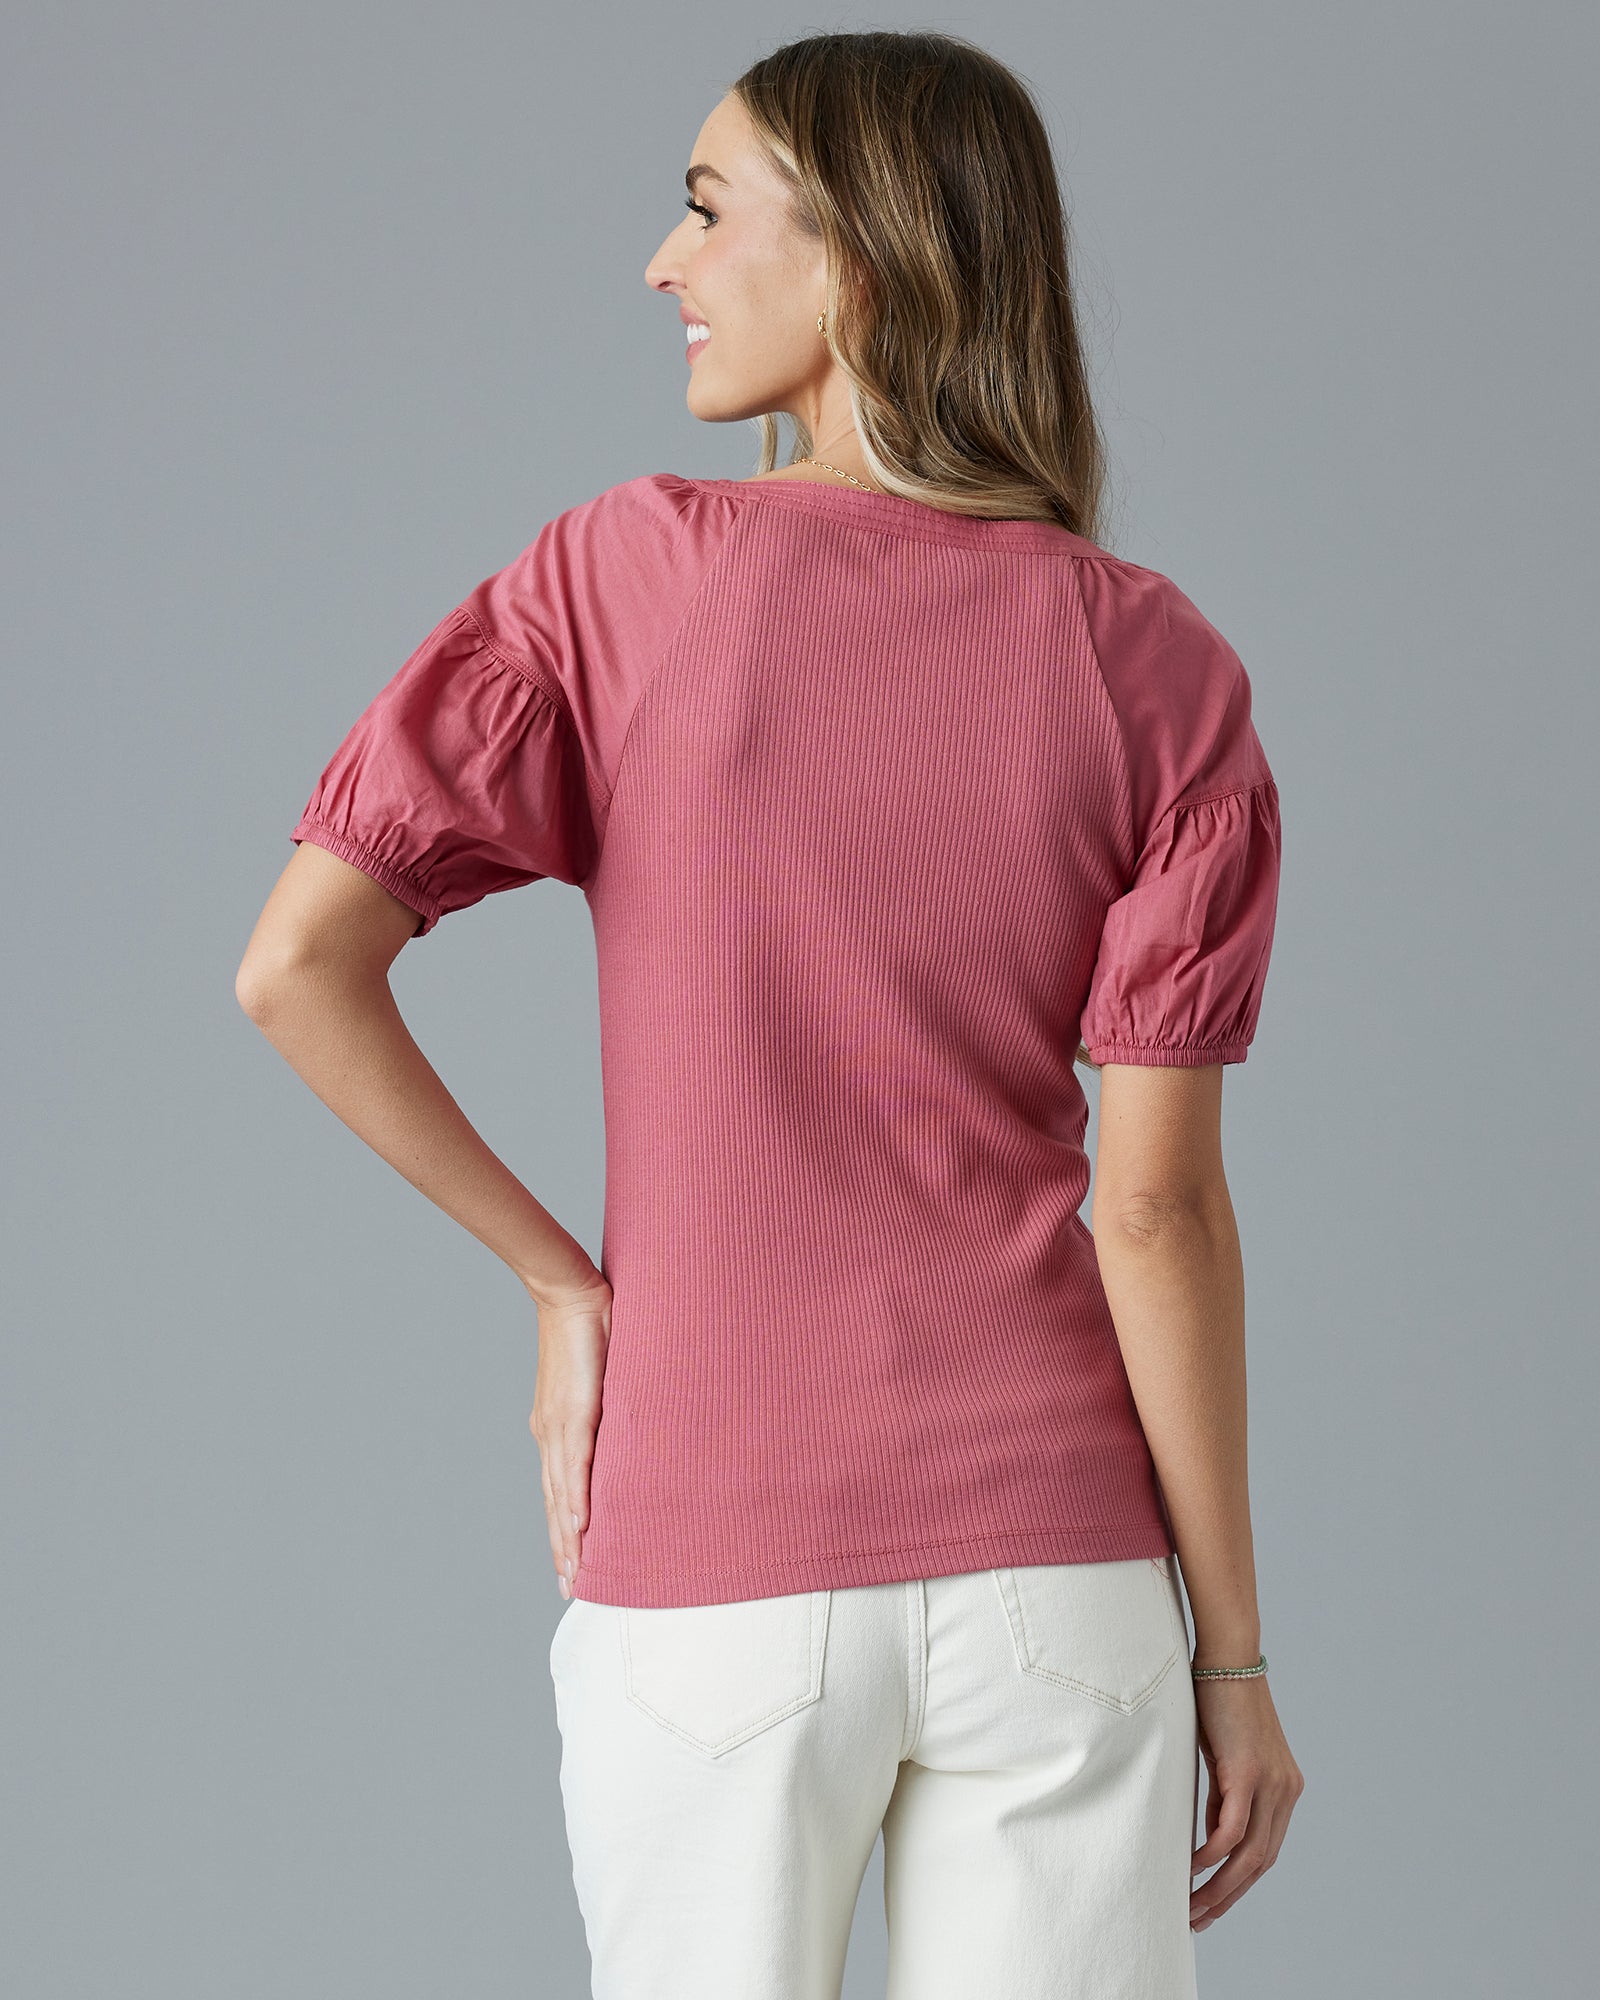 Woman in a pink, short sleeve, ribbed top